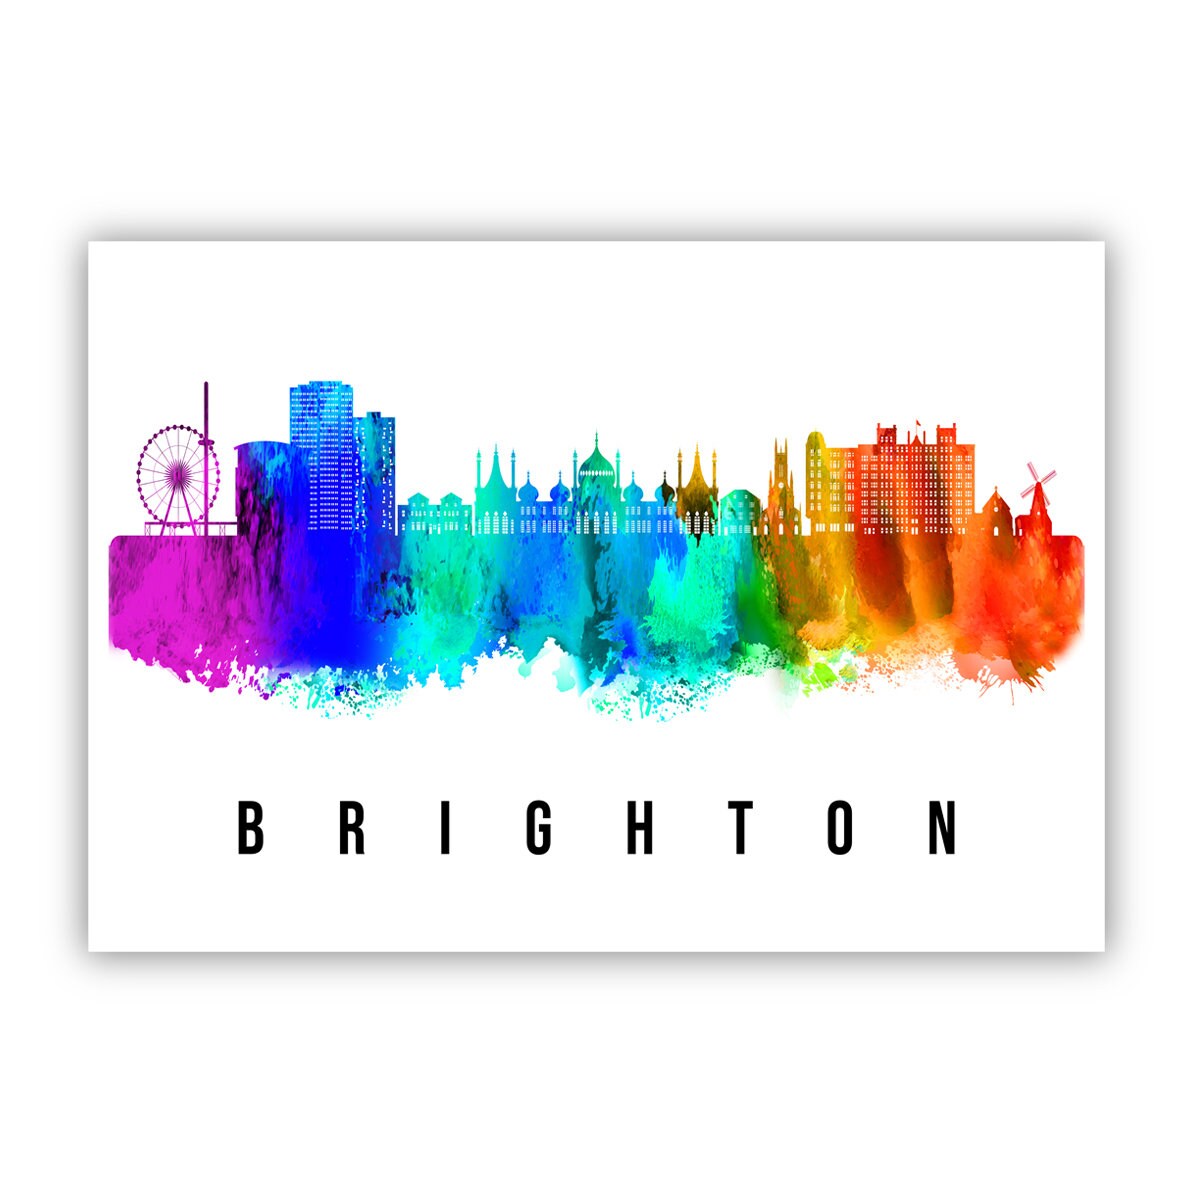 Brighton England Poster, Skyline poster cityscape poster, Landmark City Illustration poster, Home wall decoration, Office wall art